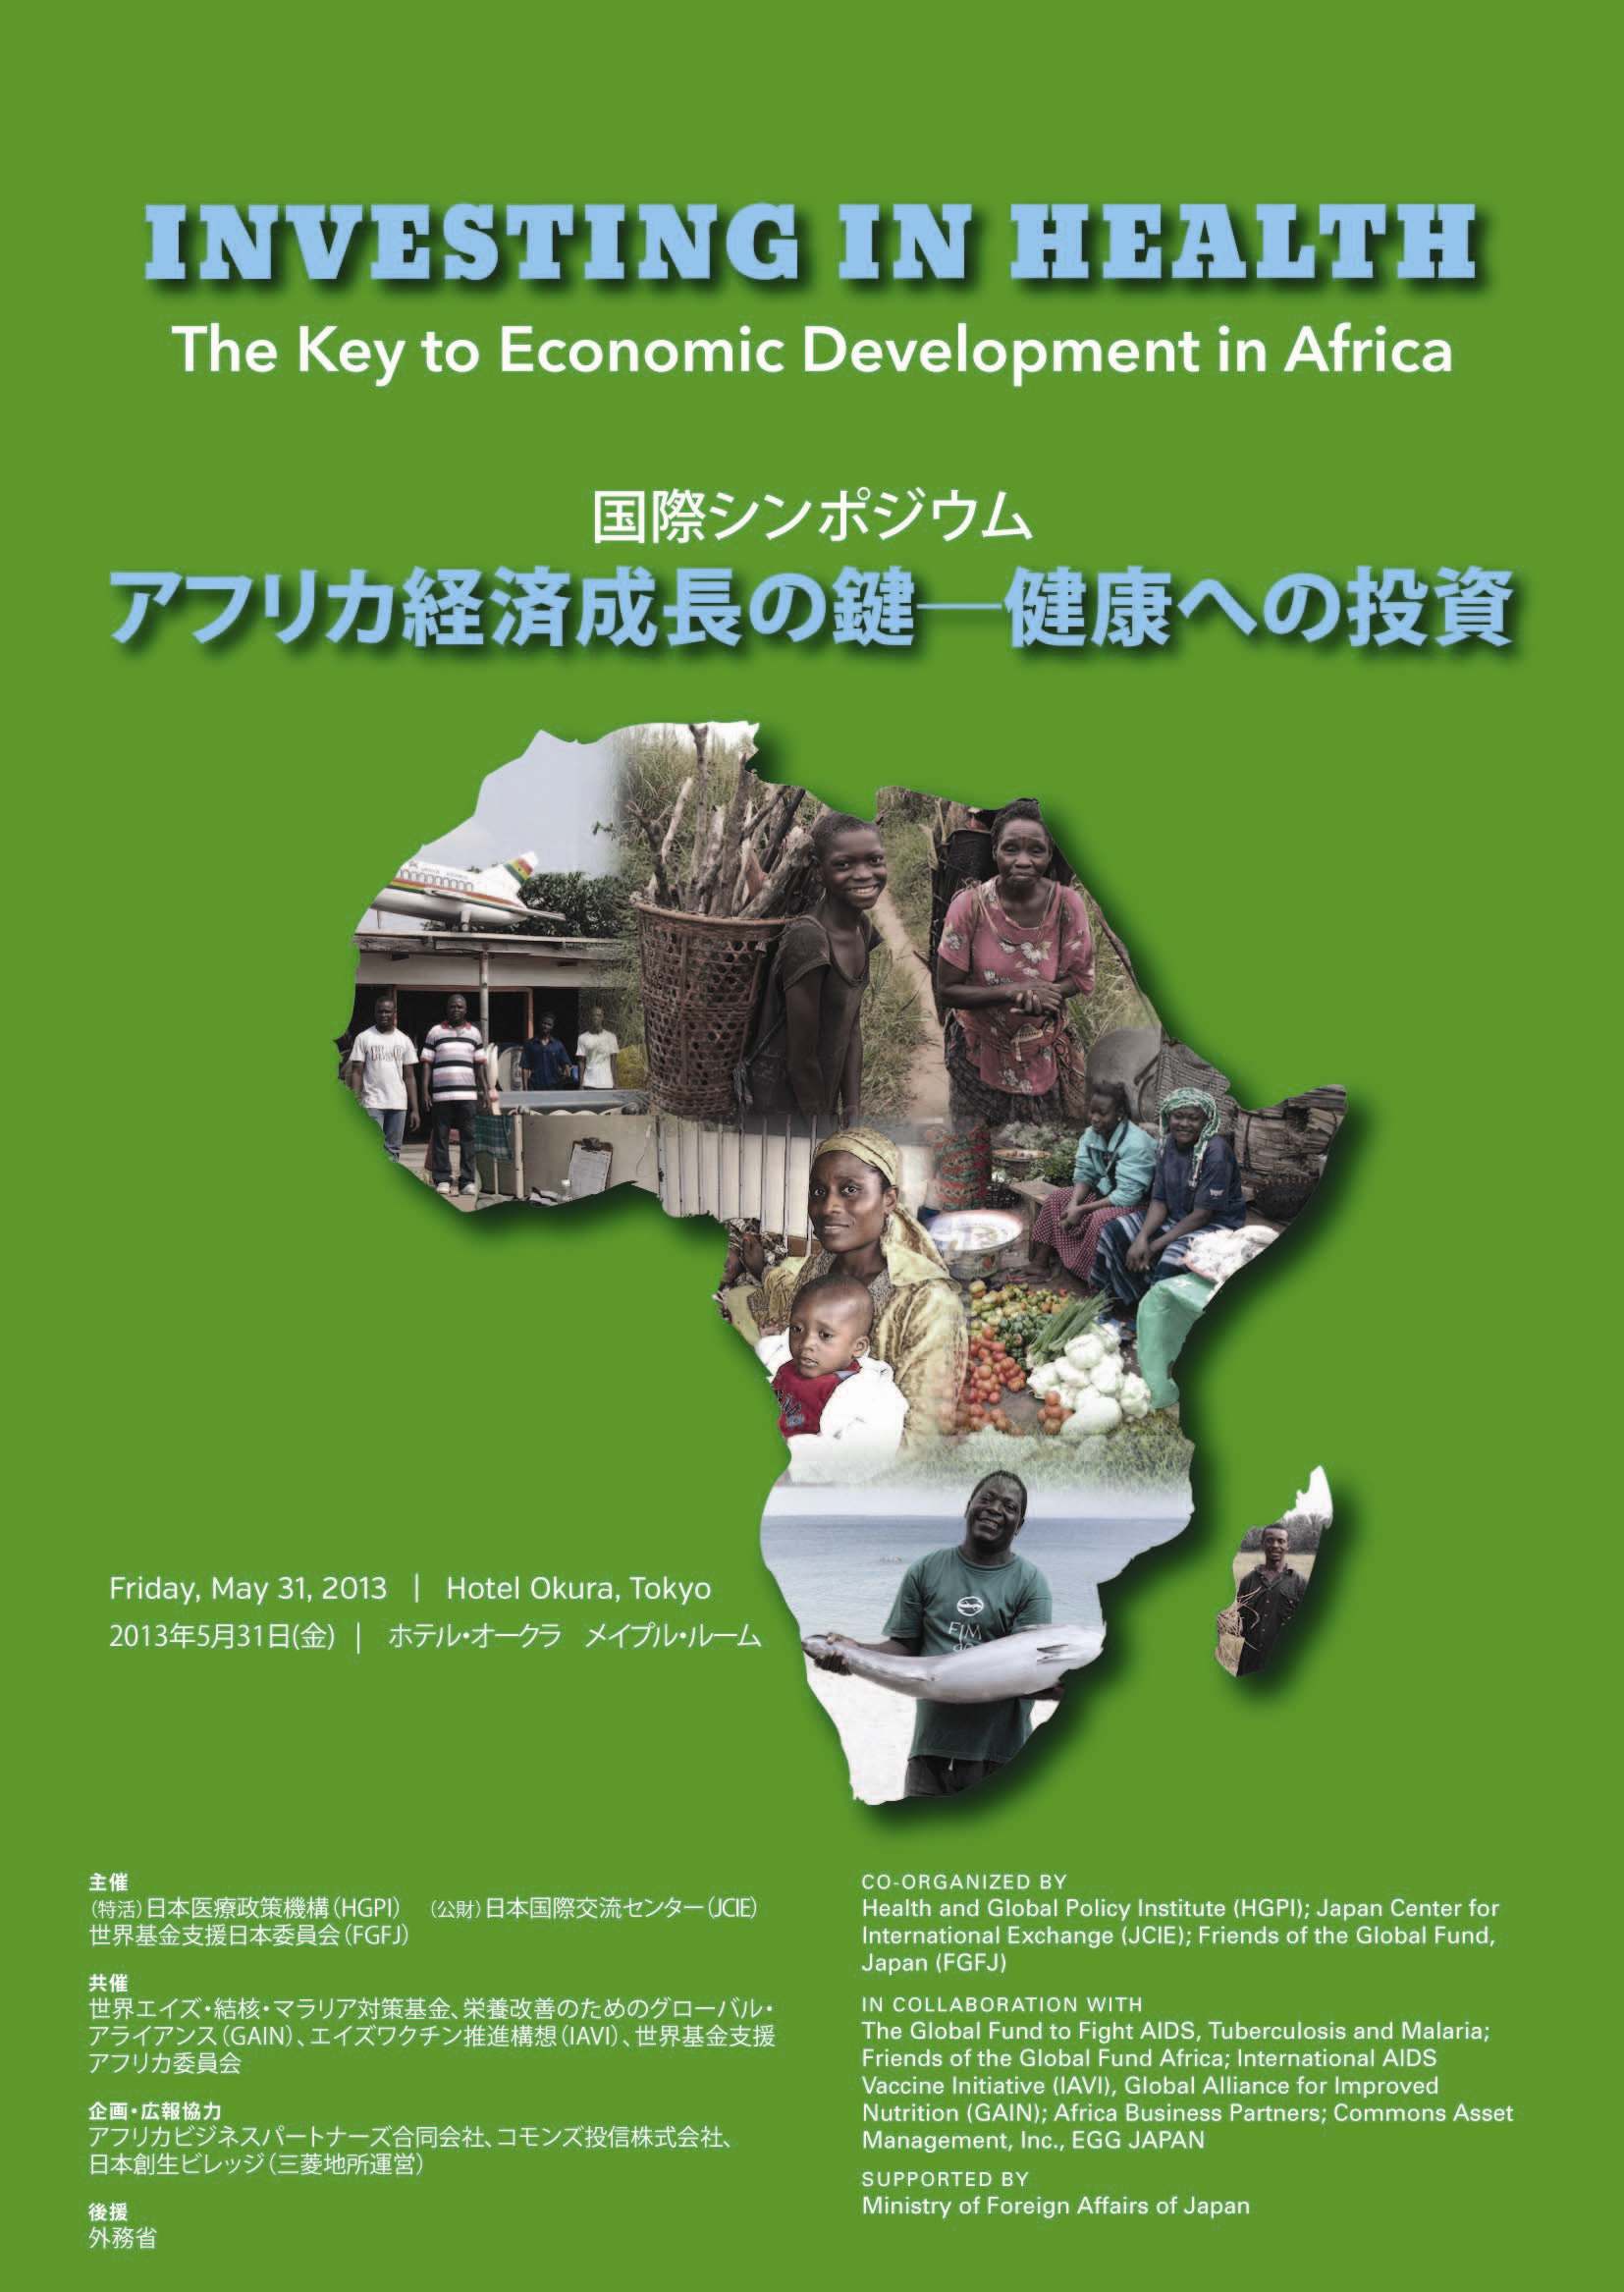 (Posting Report) “Investing in Health: The Key to Economic Development in Africa”